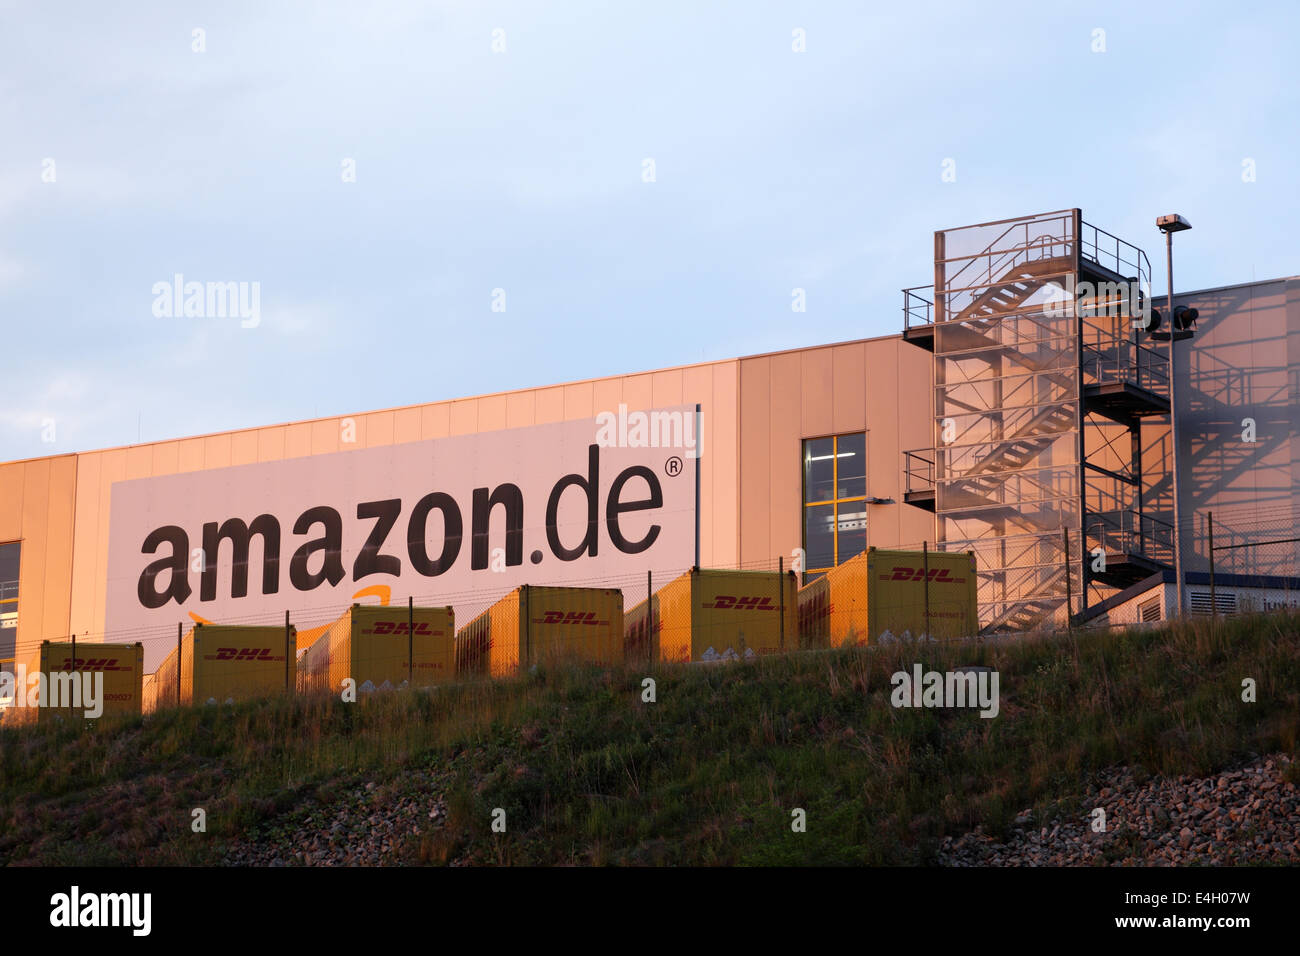 Amazon De High Resolution Stock Photography and Images - Alamy